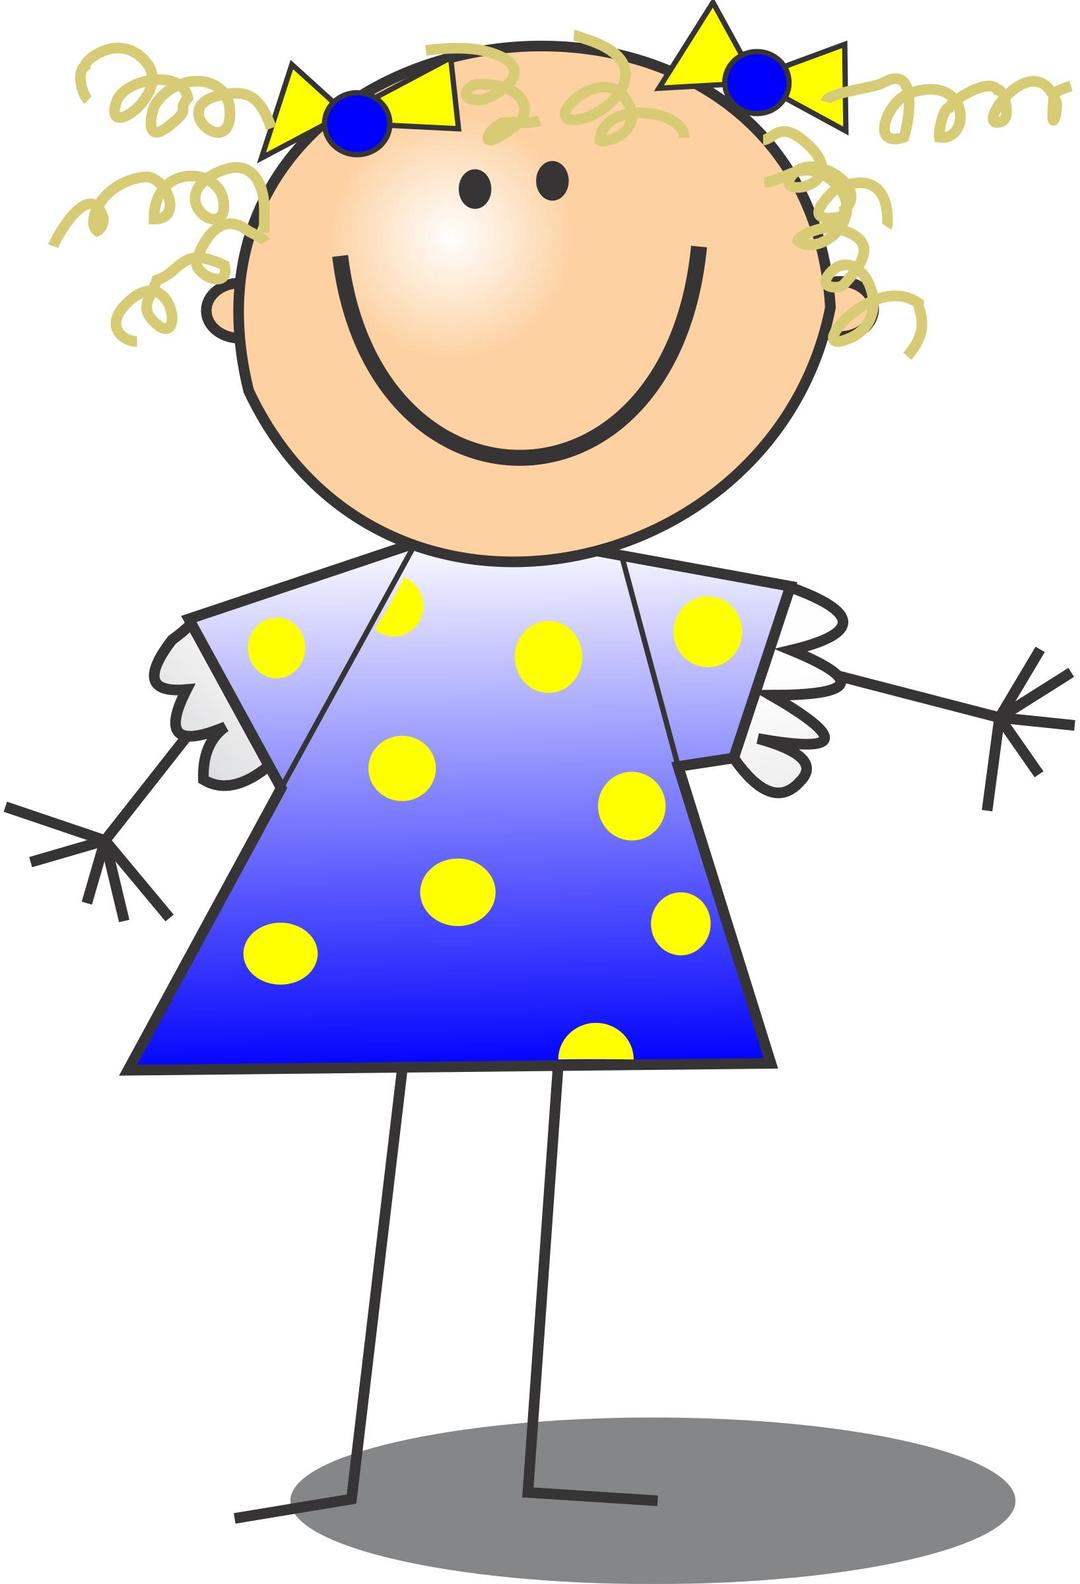 Girl Smiling Stick Figure Curly Hair png transparent